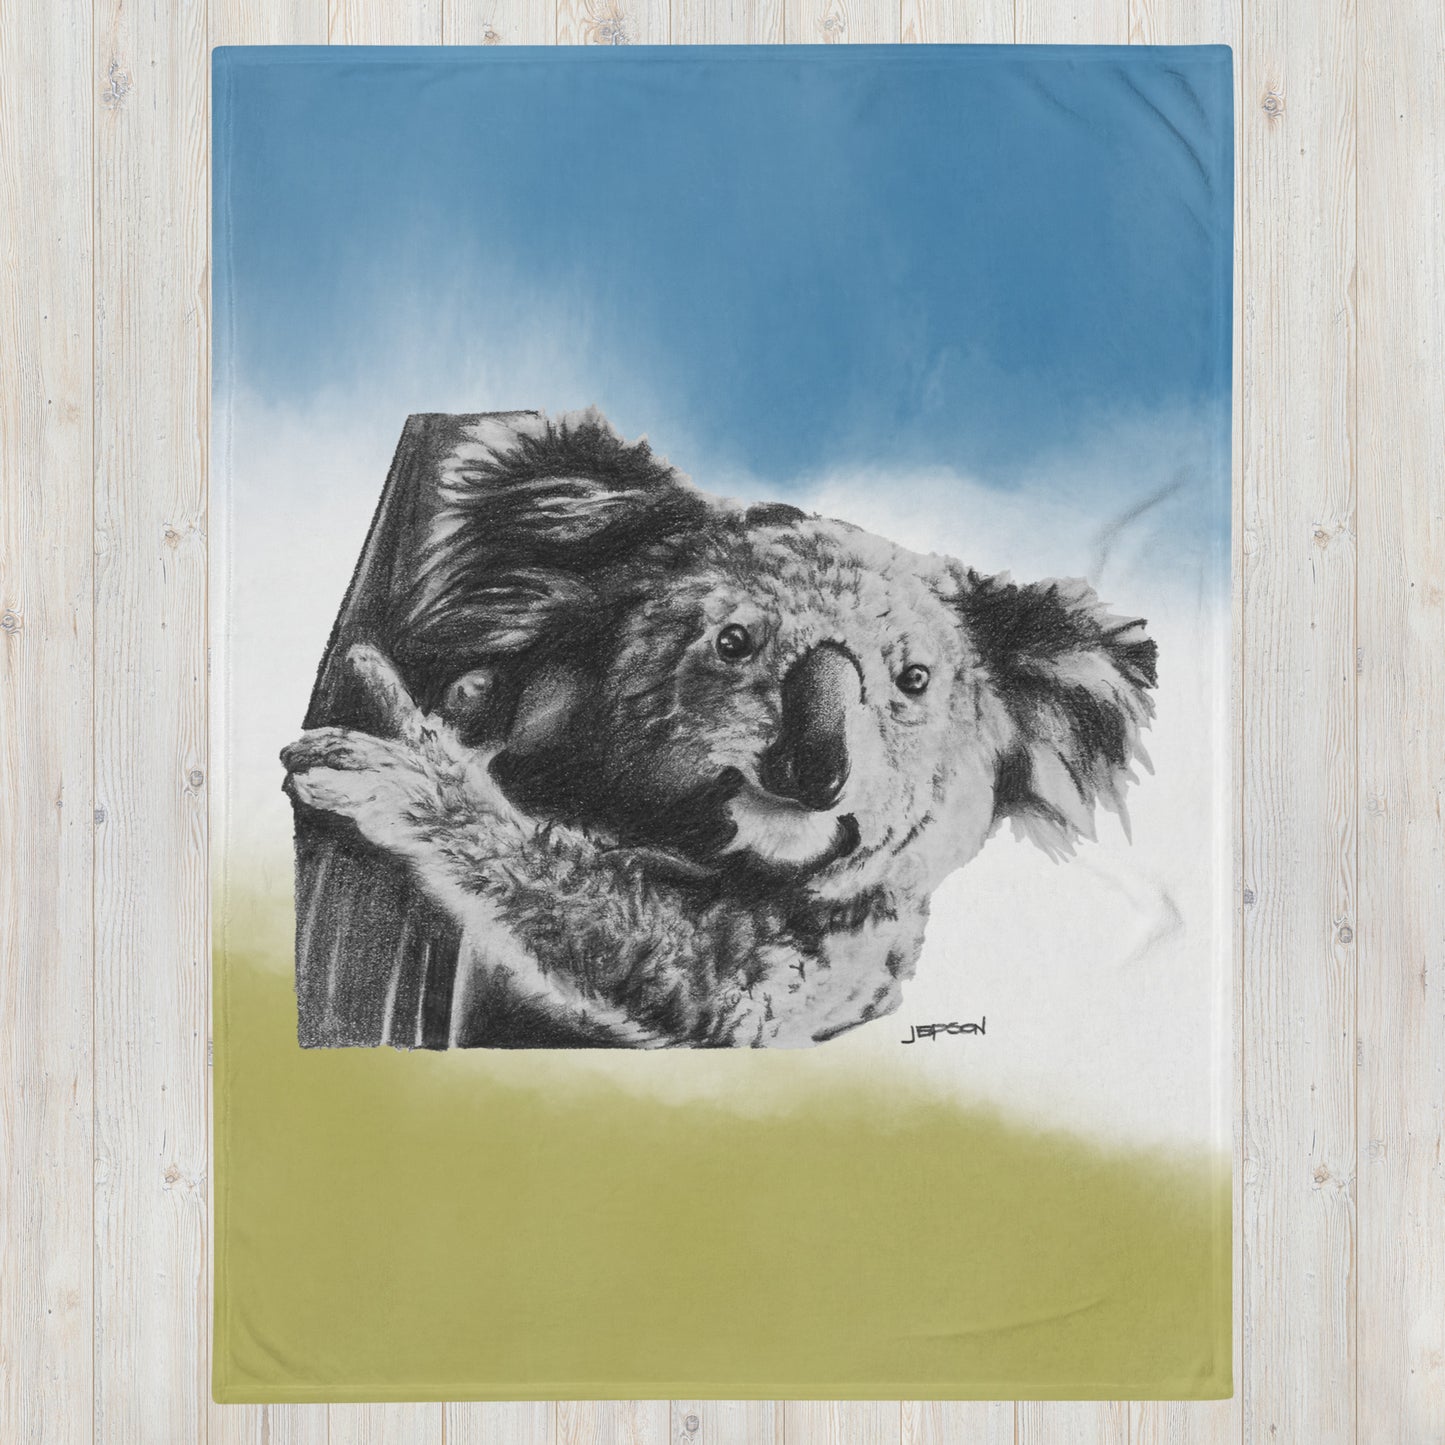 These "Koala Throw Blanket" are from a drawing of mine created with a graphite pencil. It has been digitally optimized and transferred to a 100% Polyester throw blanket.